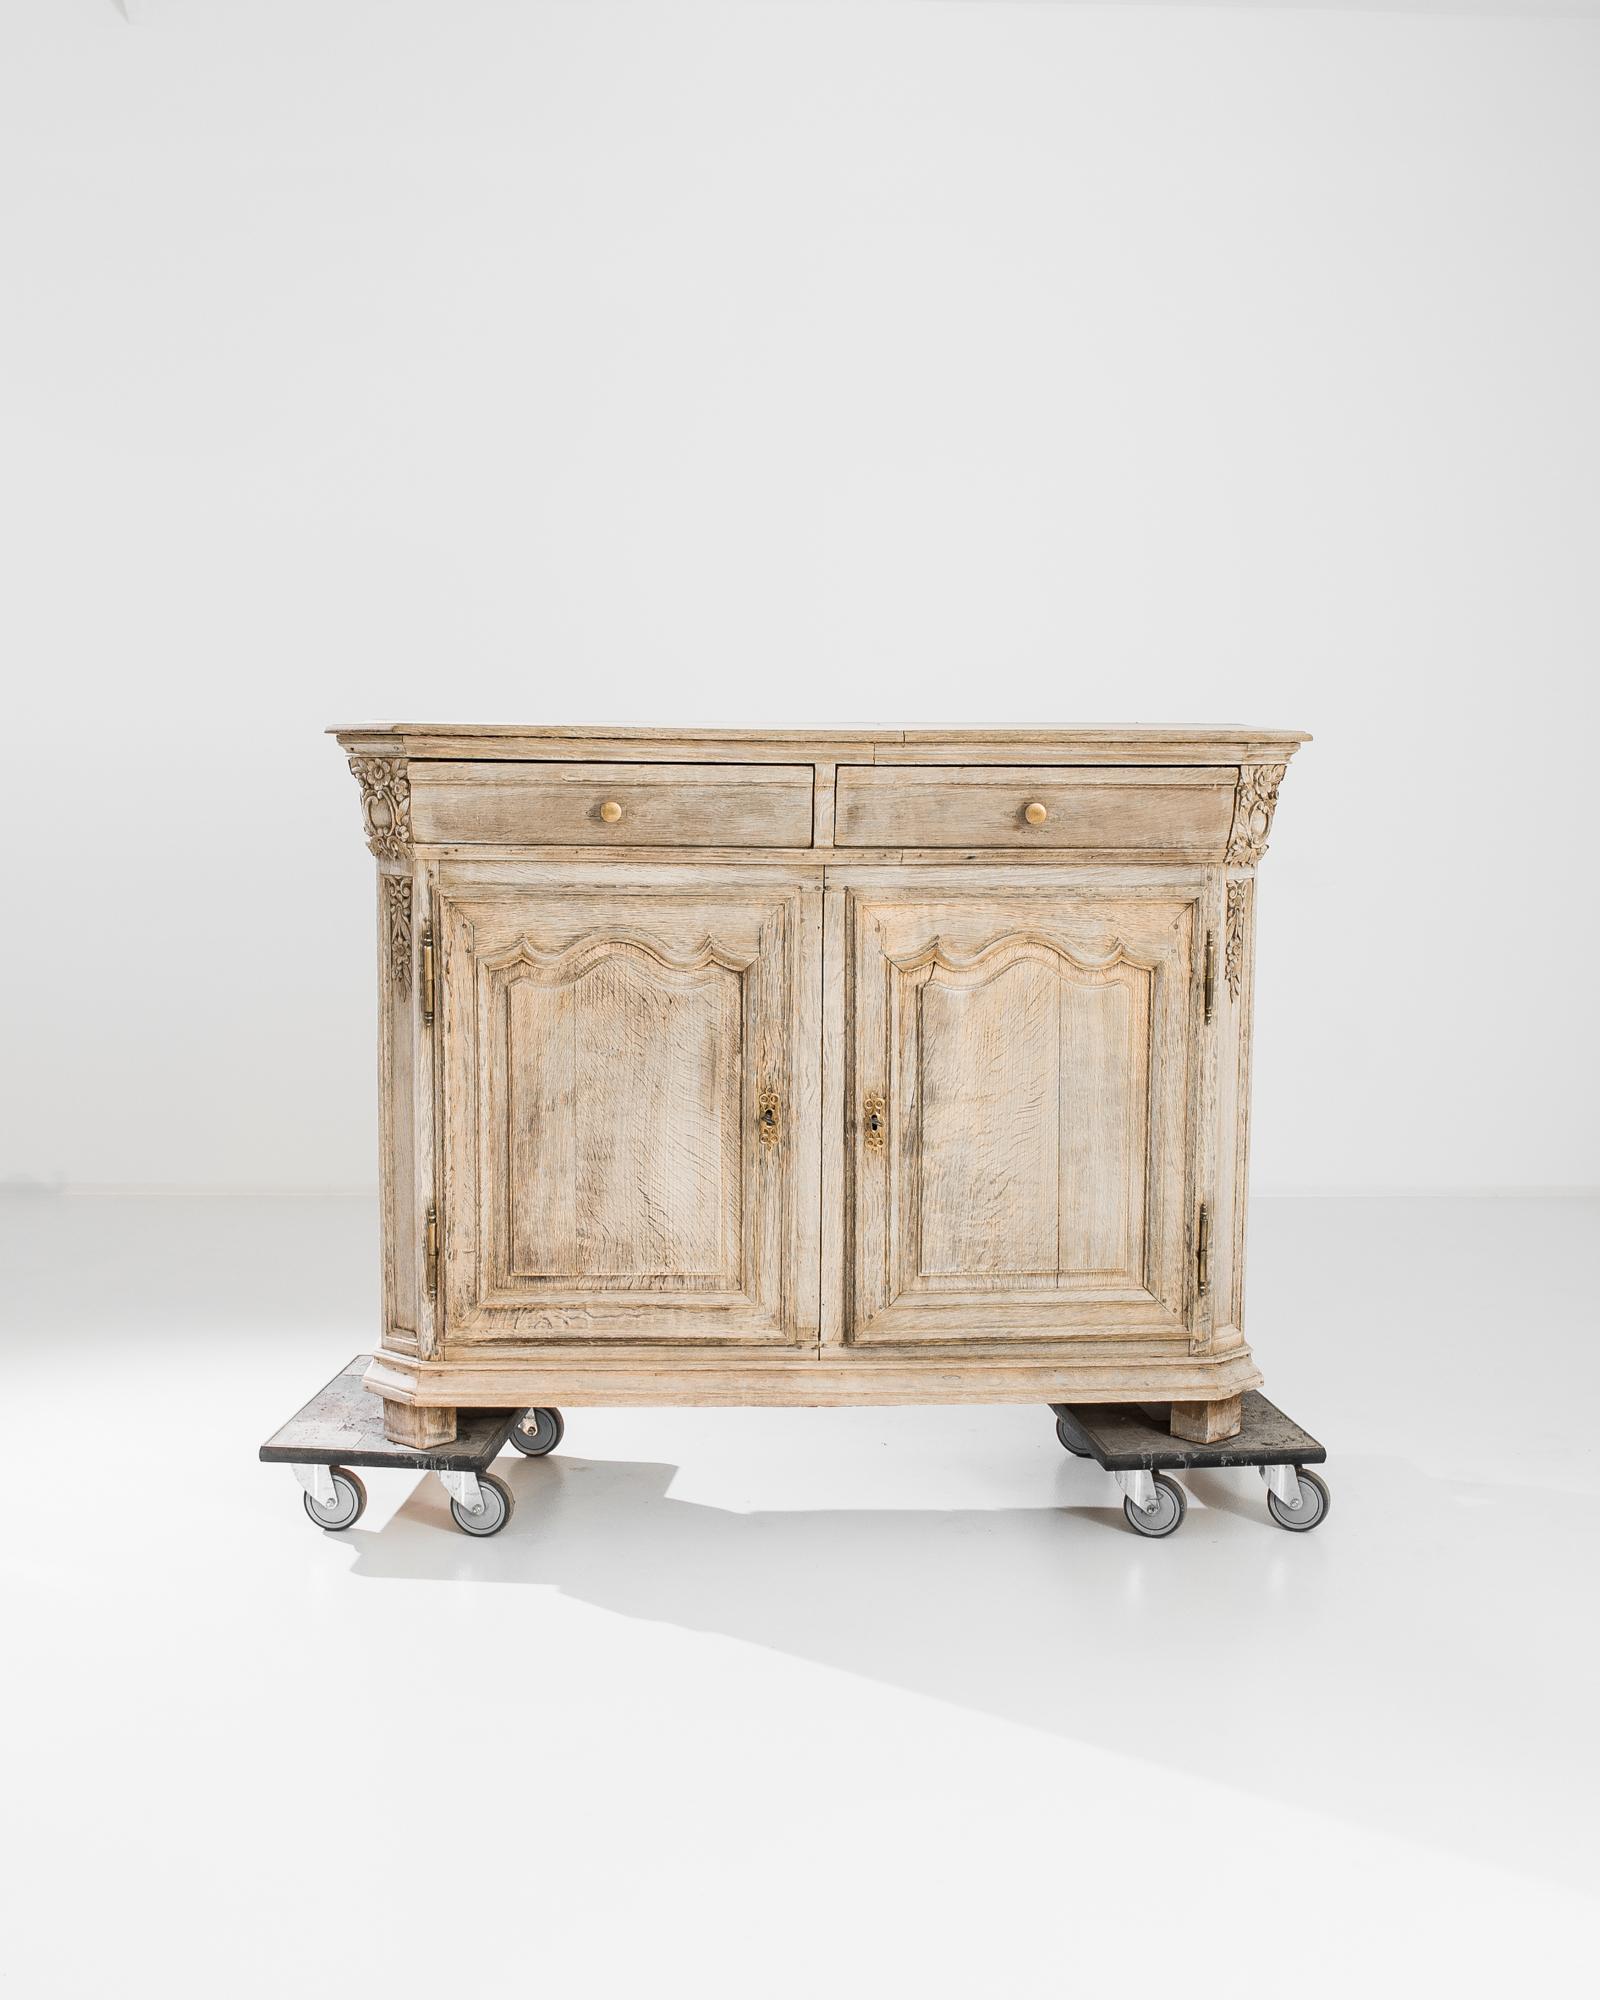 Transport yourself to 19th-century Belgium with this exquisitely fashioned oak buffet. Crafted with an elegant blend of light wood and resplendent gold accents, it exudes sophistication while promising enduring functionality. Open the drawers to